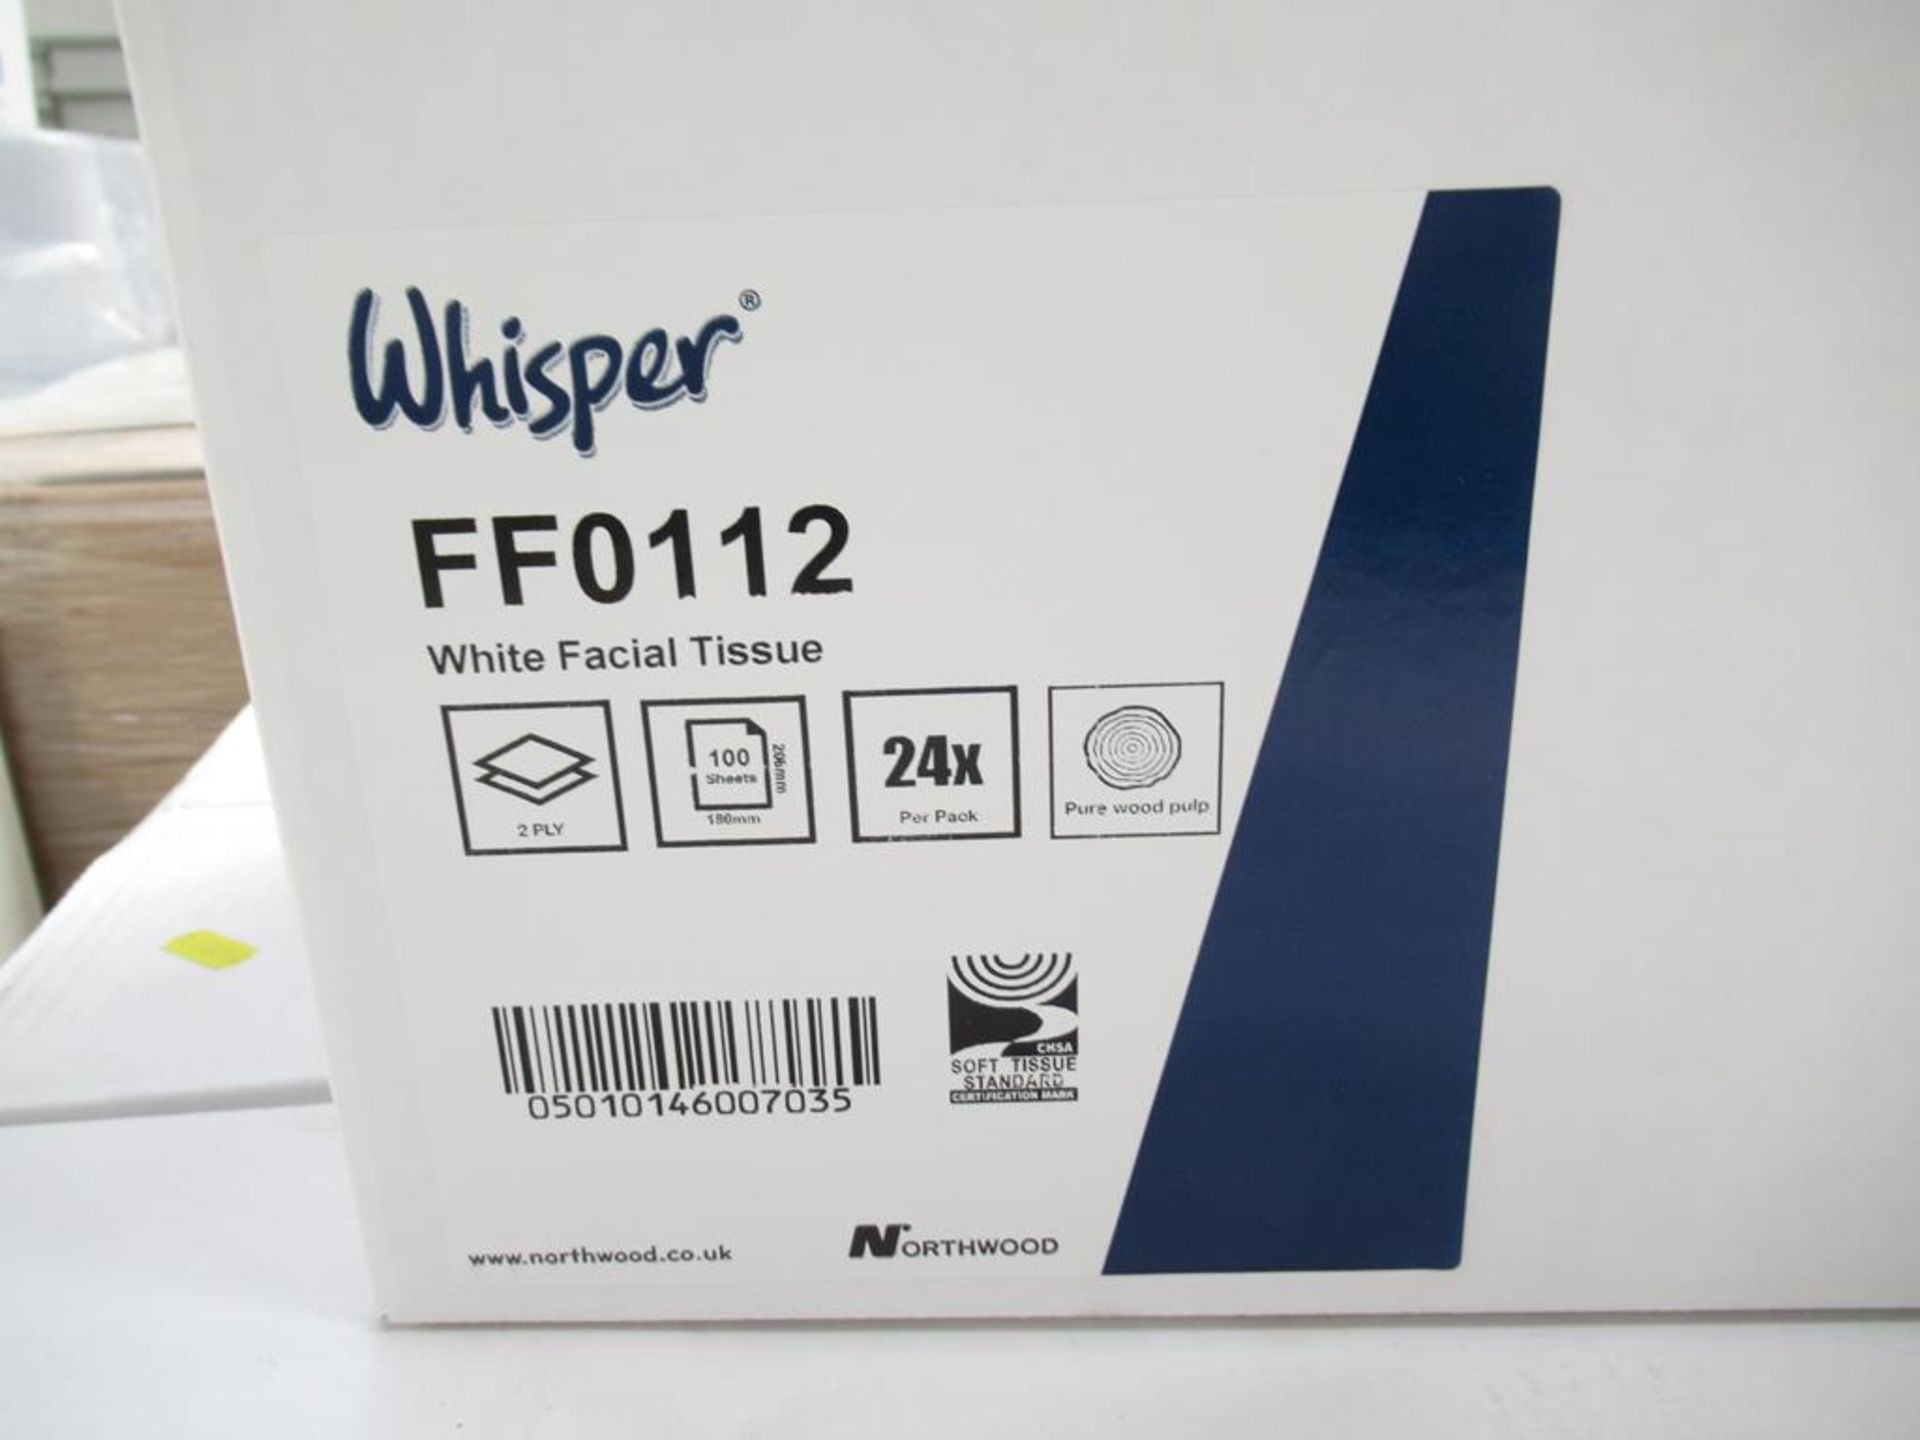 13 x boxes of Whisper FF0112 White Facial Tissues - Image 2 of 2